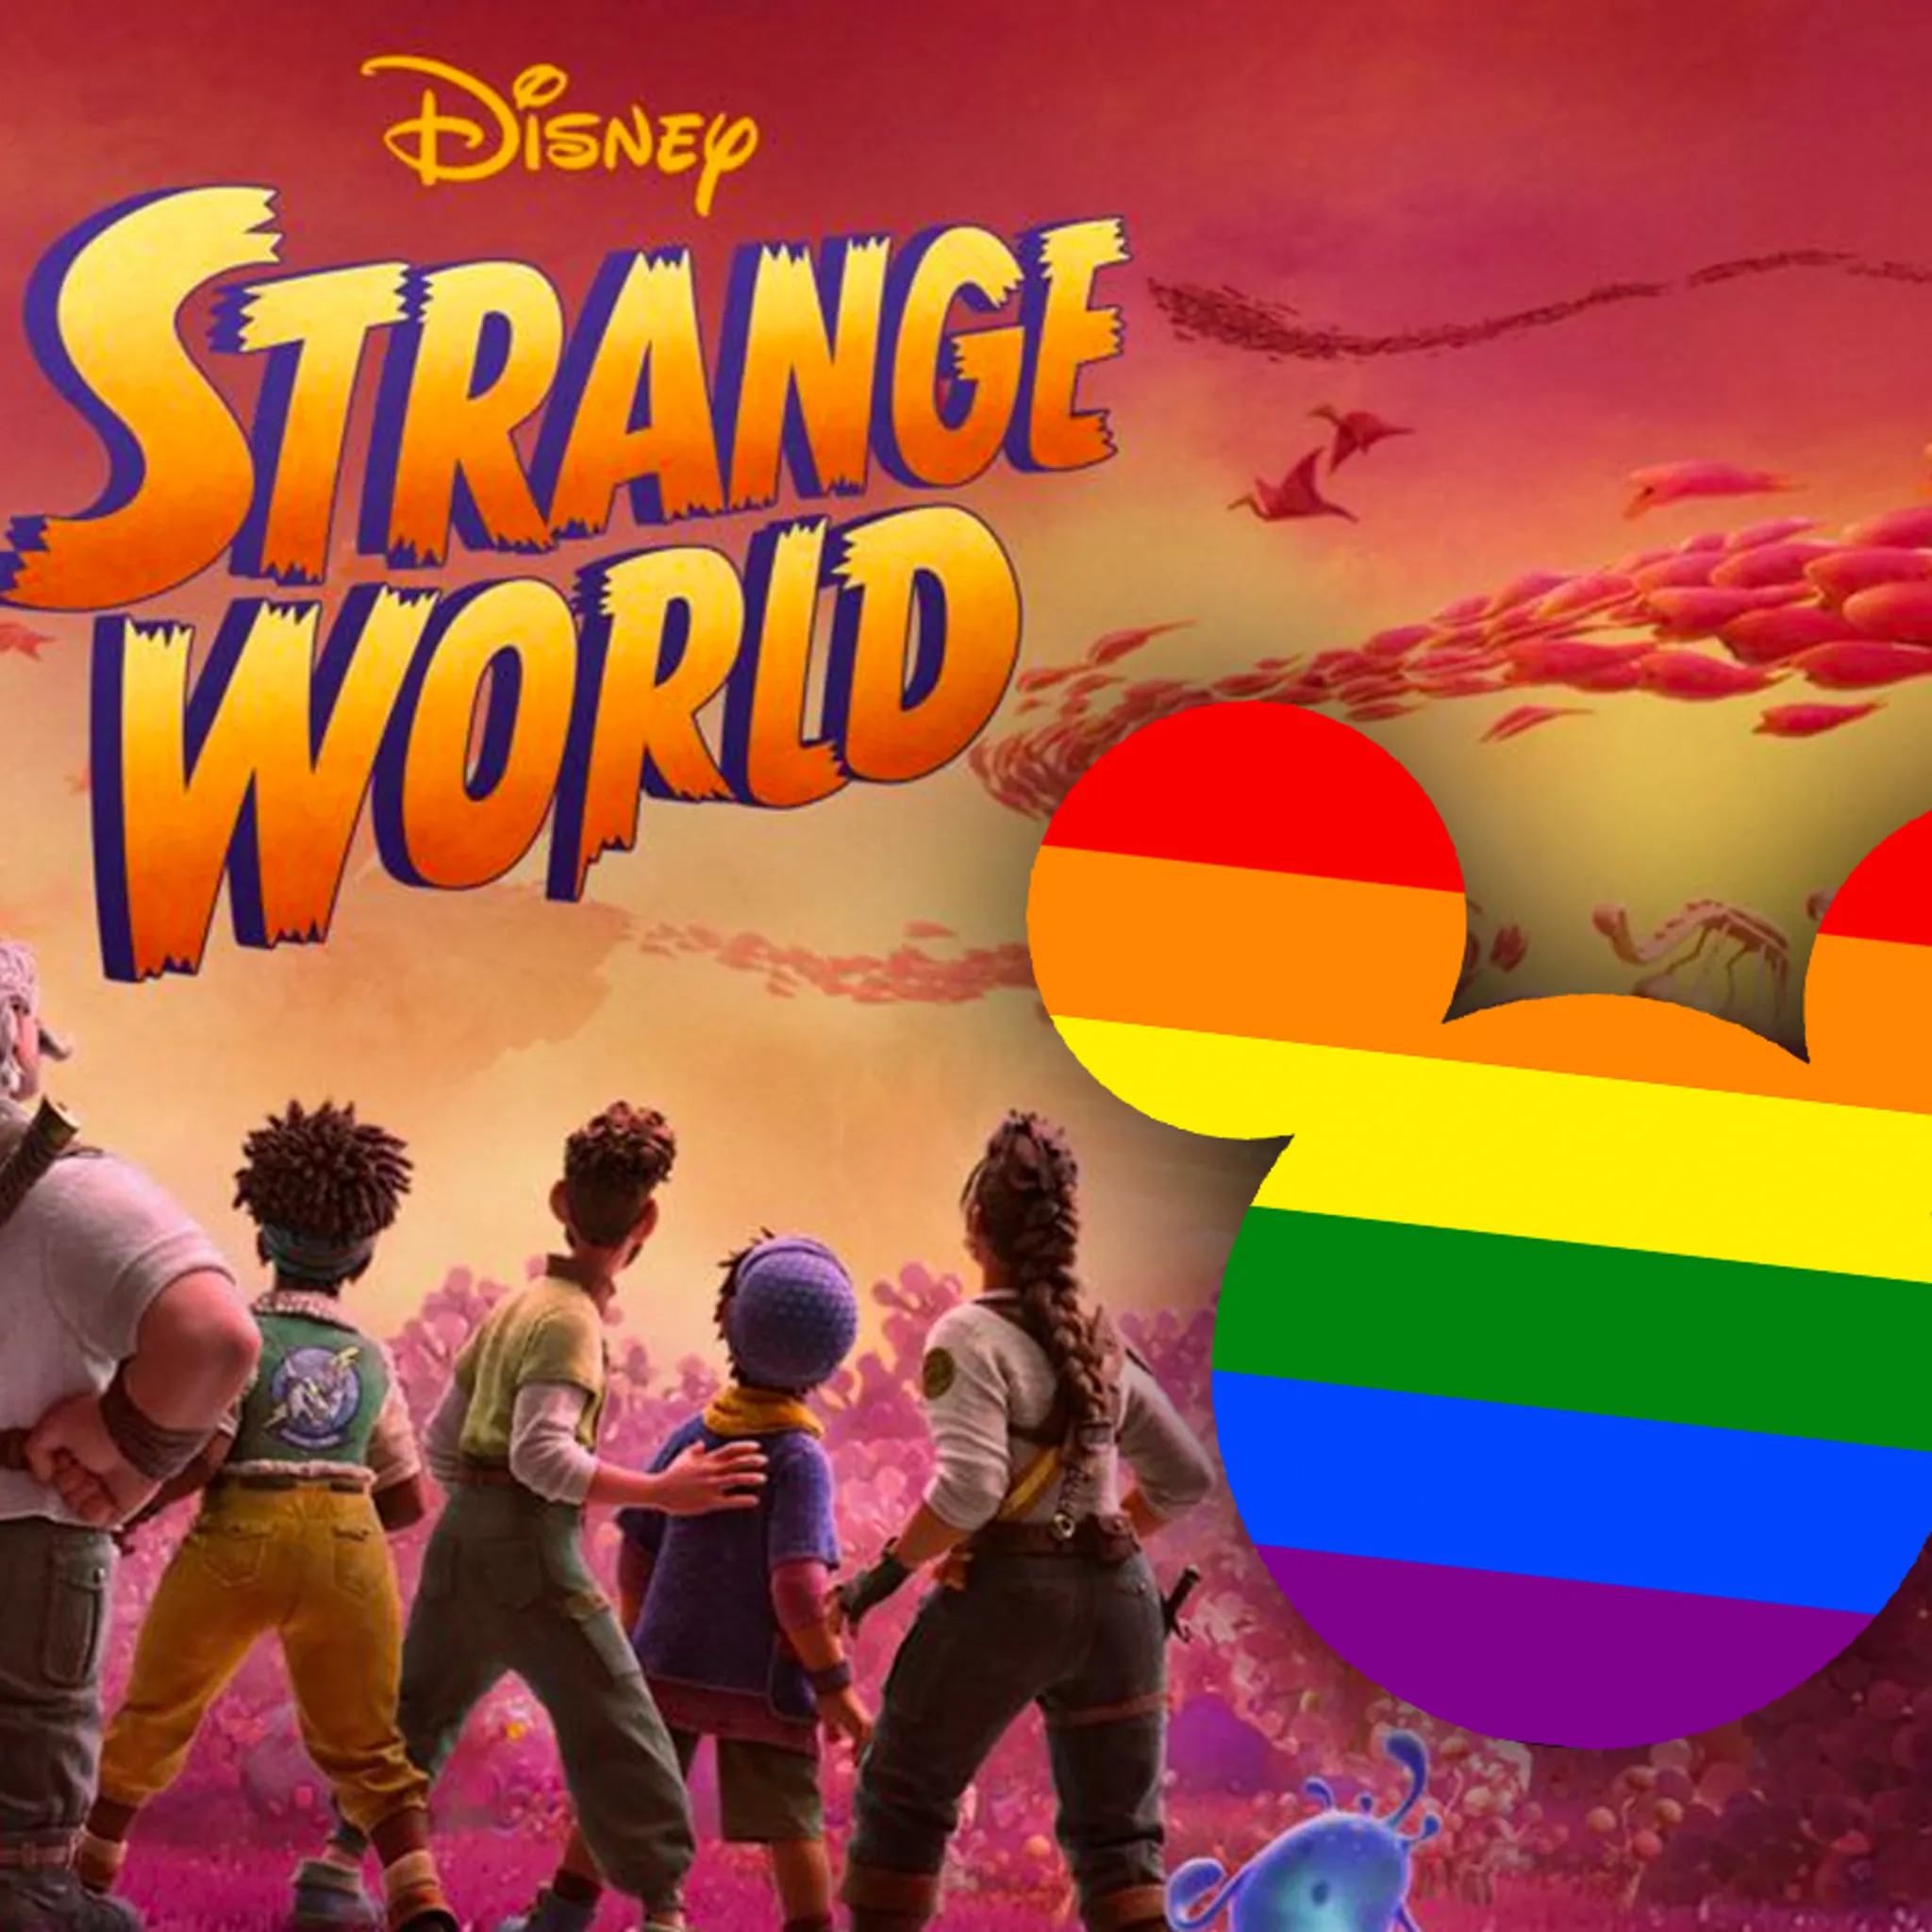 Top LGBT group criticizes Disney and Hollywood for not promoting homosexuality enough